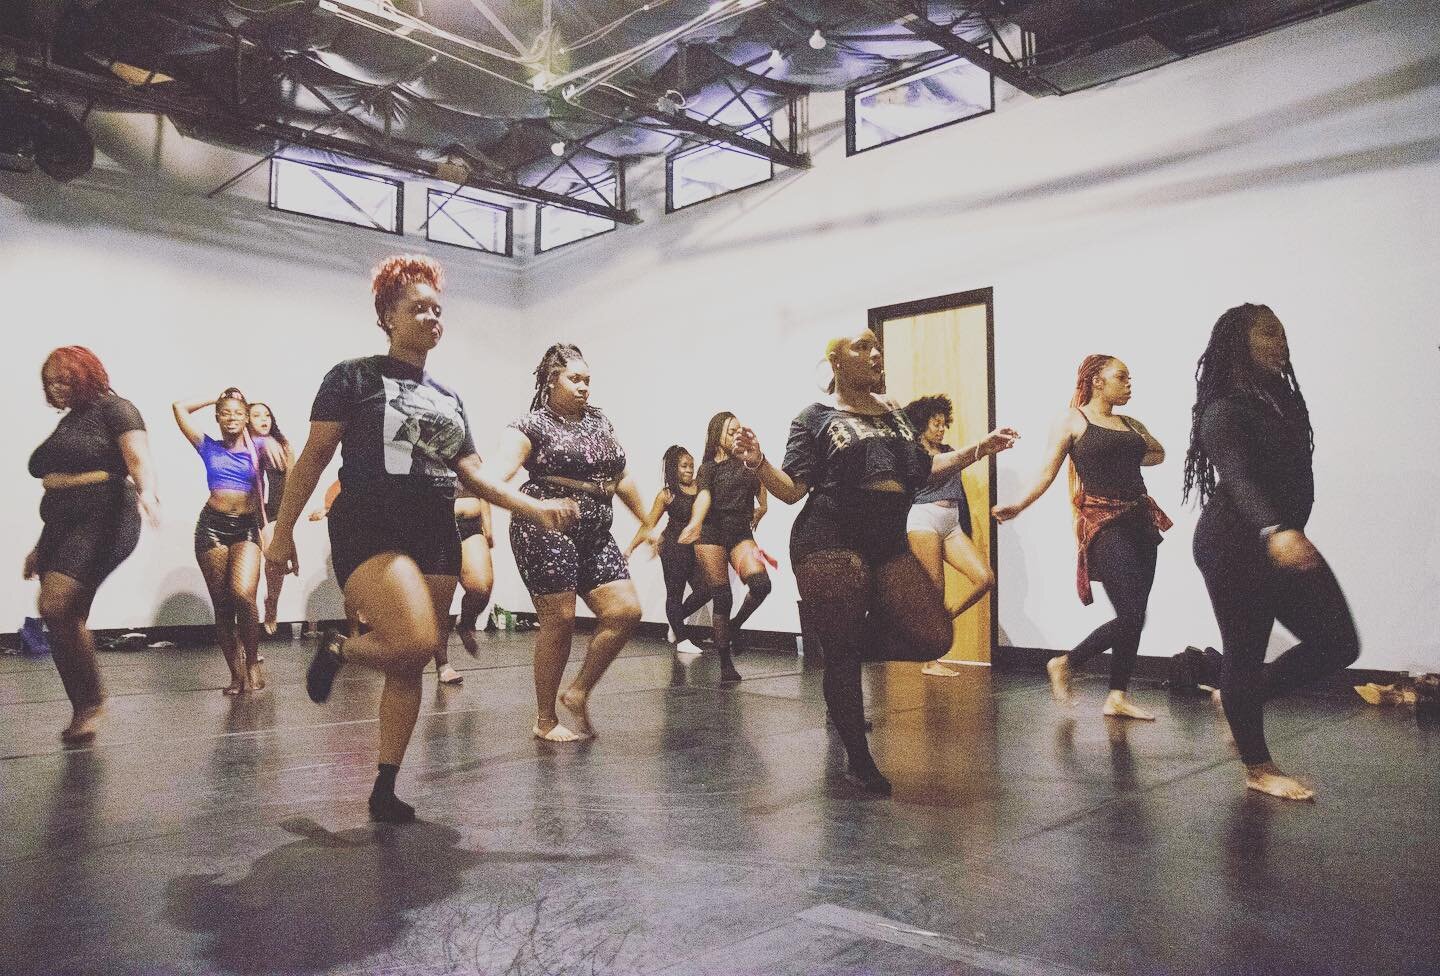 Large dance studio rental space available now!

#womenempowerment #powerful #womendance #womanownedbusiness #dallas #dallasdance #dancing #womendance #dallashiphop #dallasrental #studiorental #dallasartist